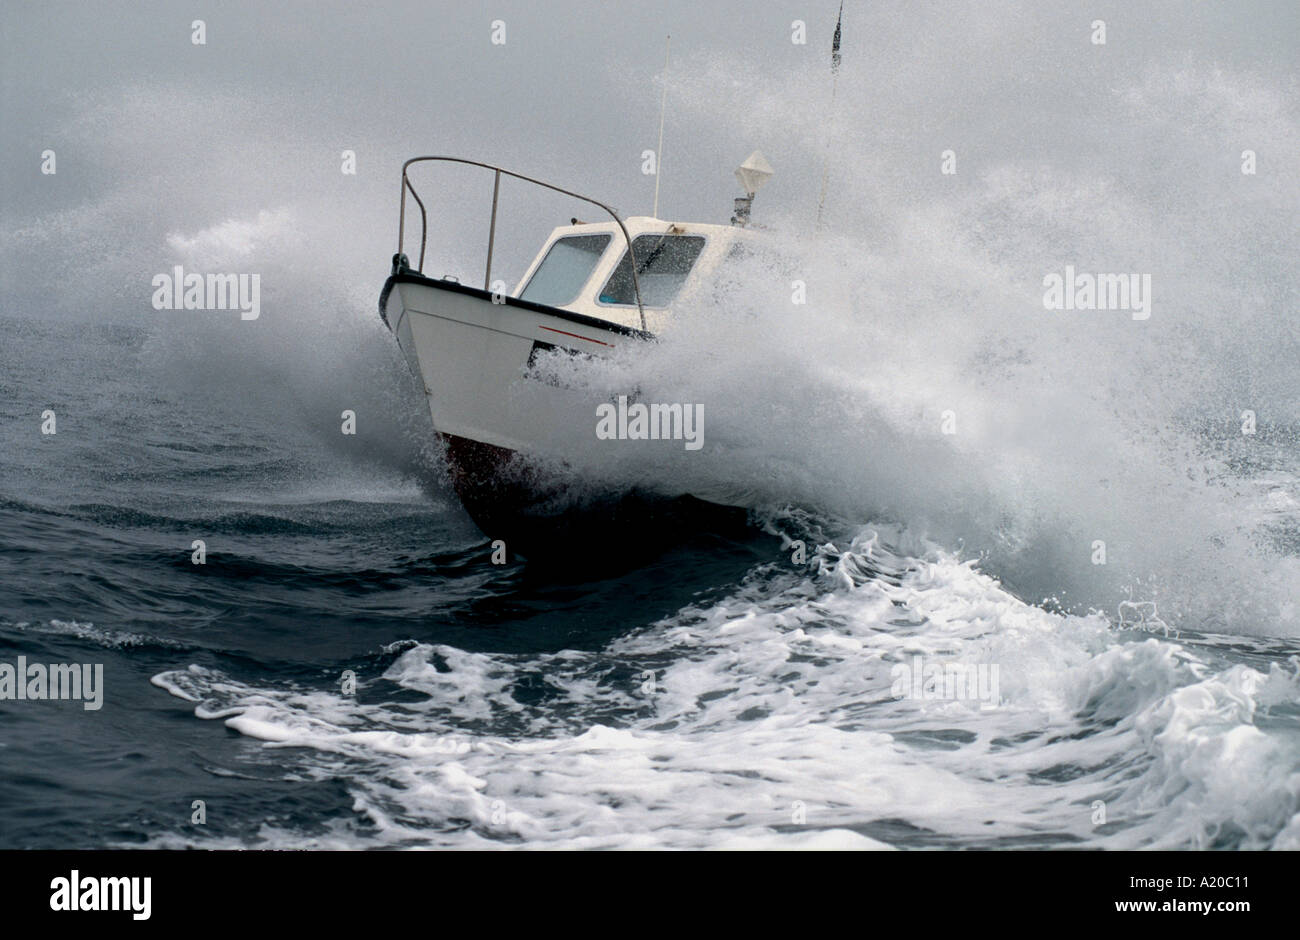 A small fishing boat in a storm at sea Stock Photo - Alamy